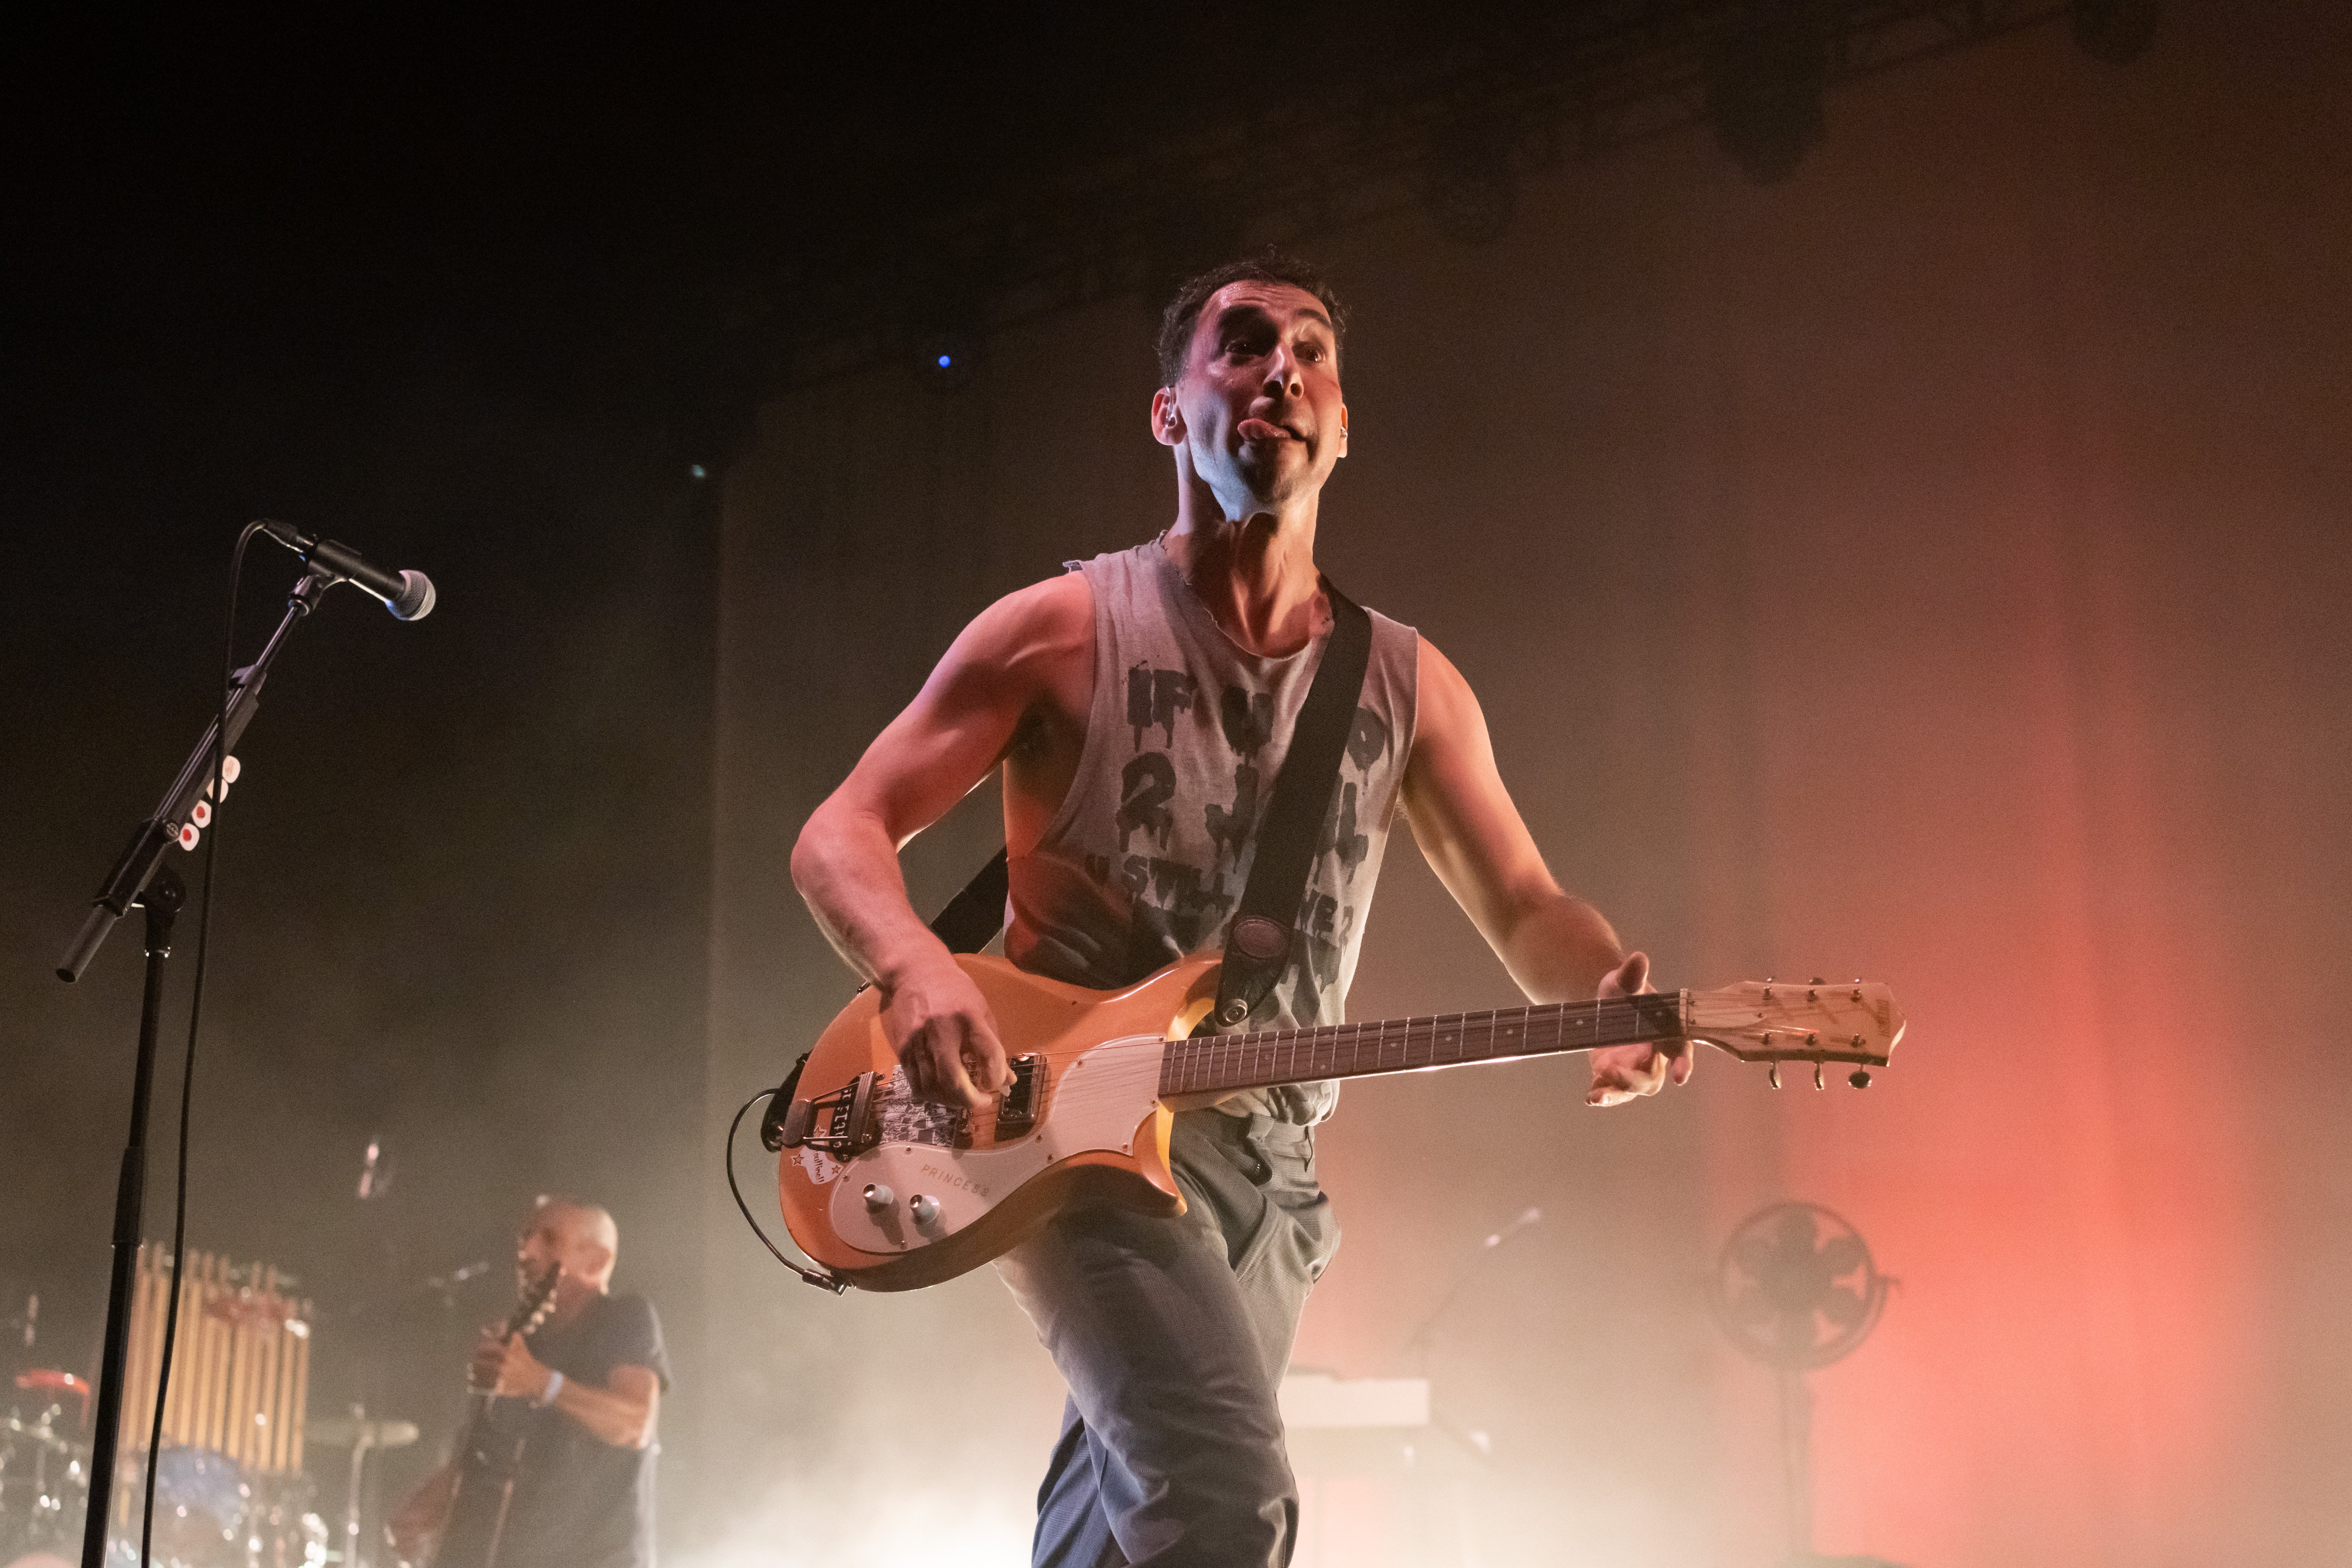 Jack Antonoff of Bleachers performs at The Forum